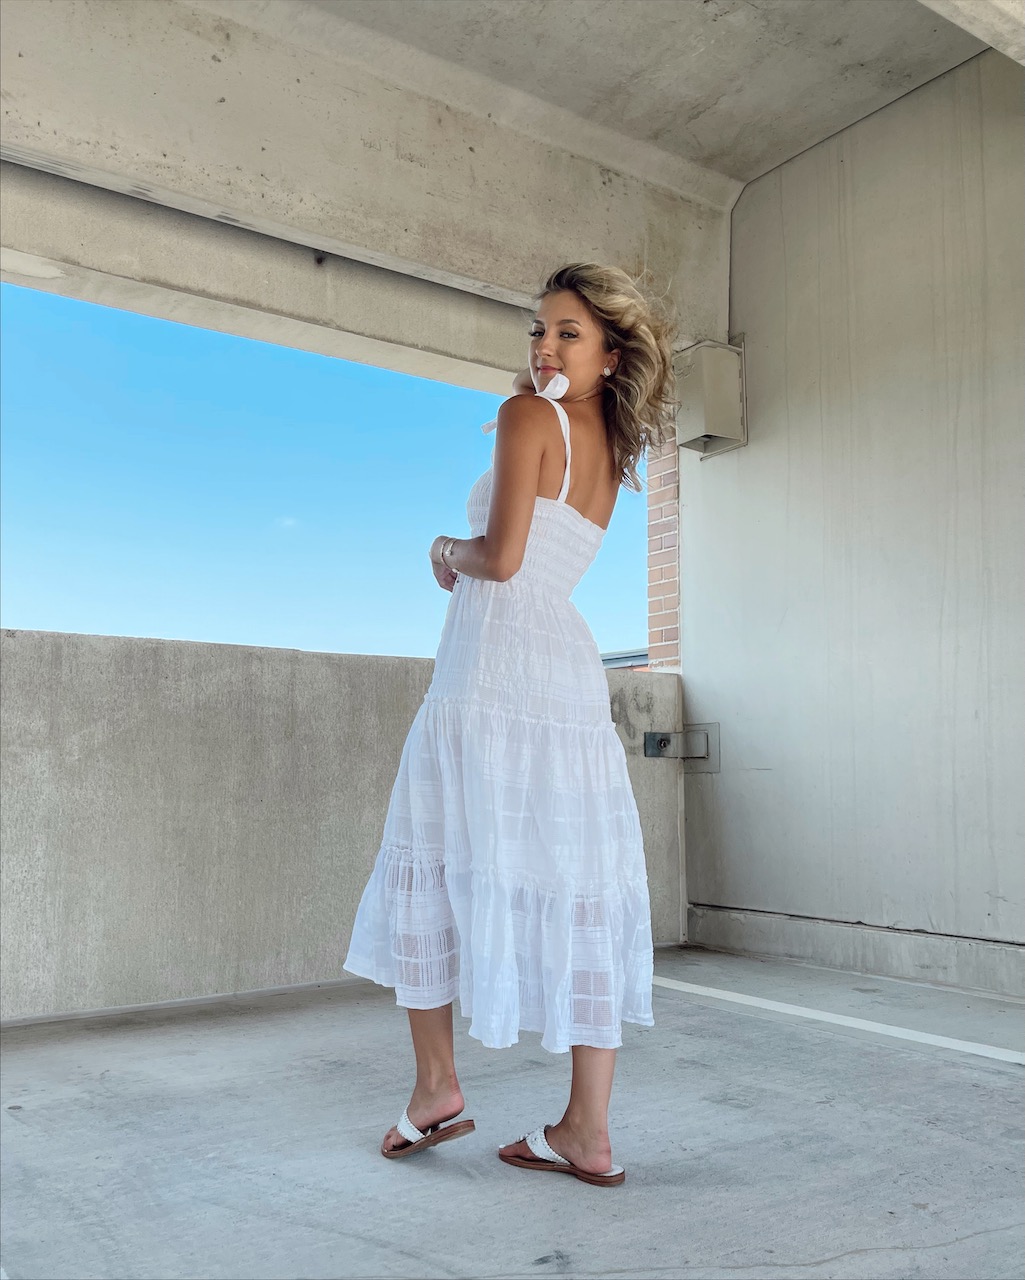 5 Vacation Outfit Ideas For Summer 2021